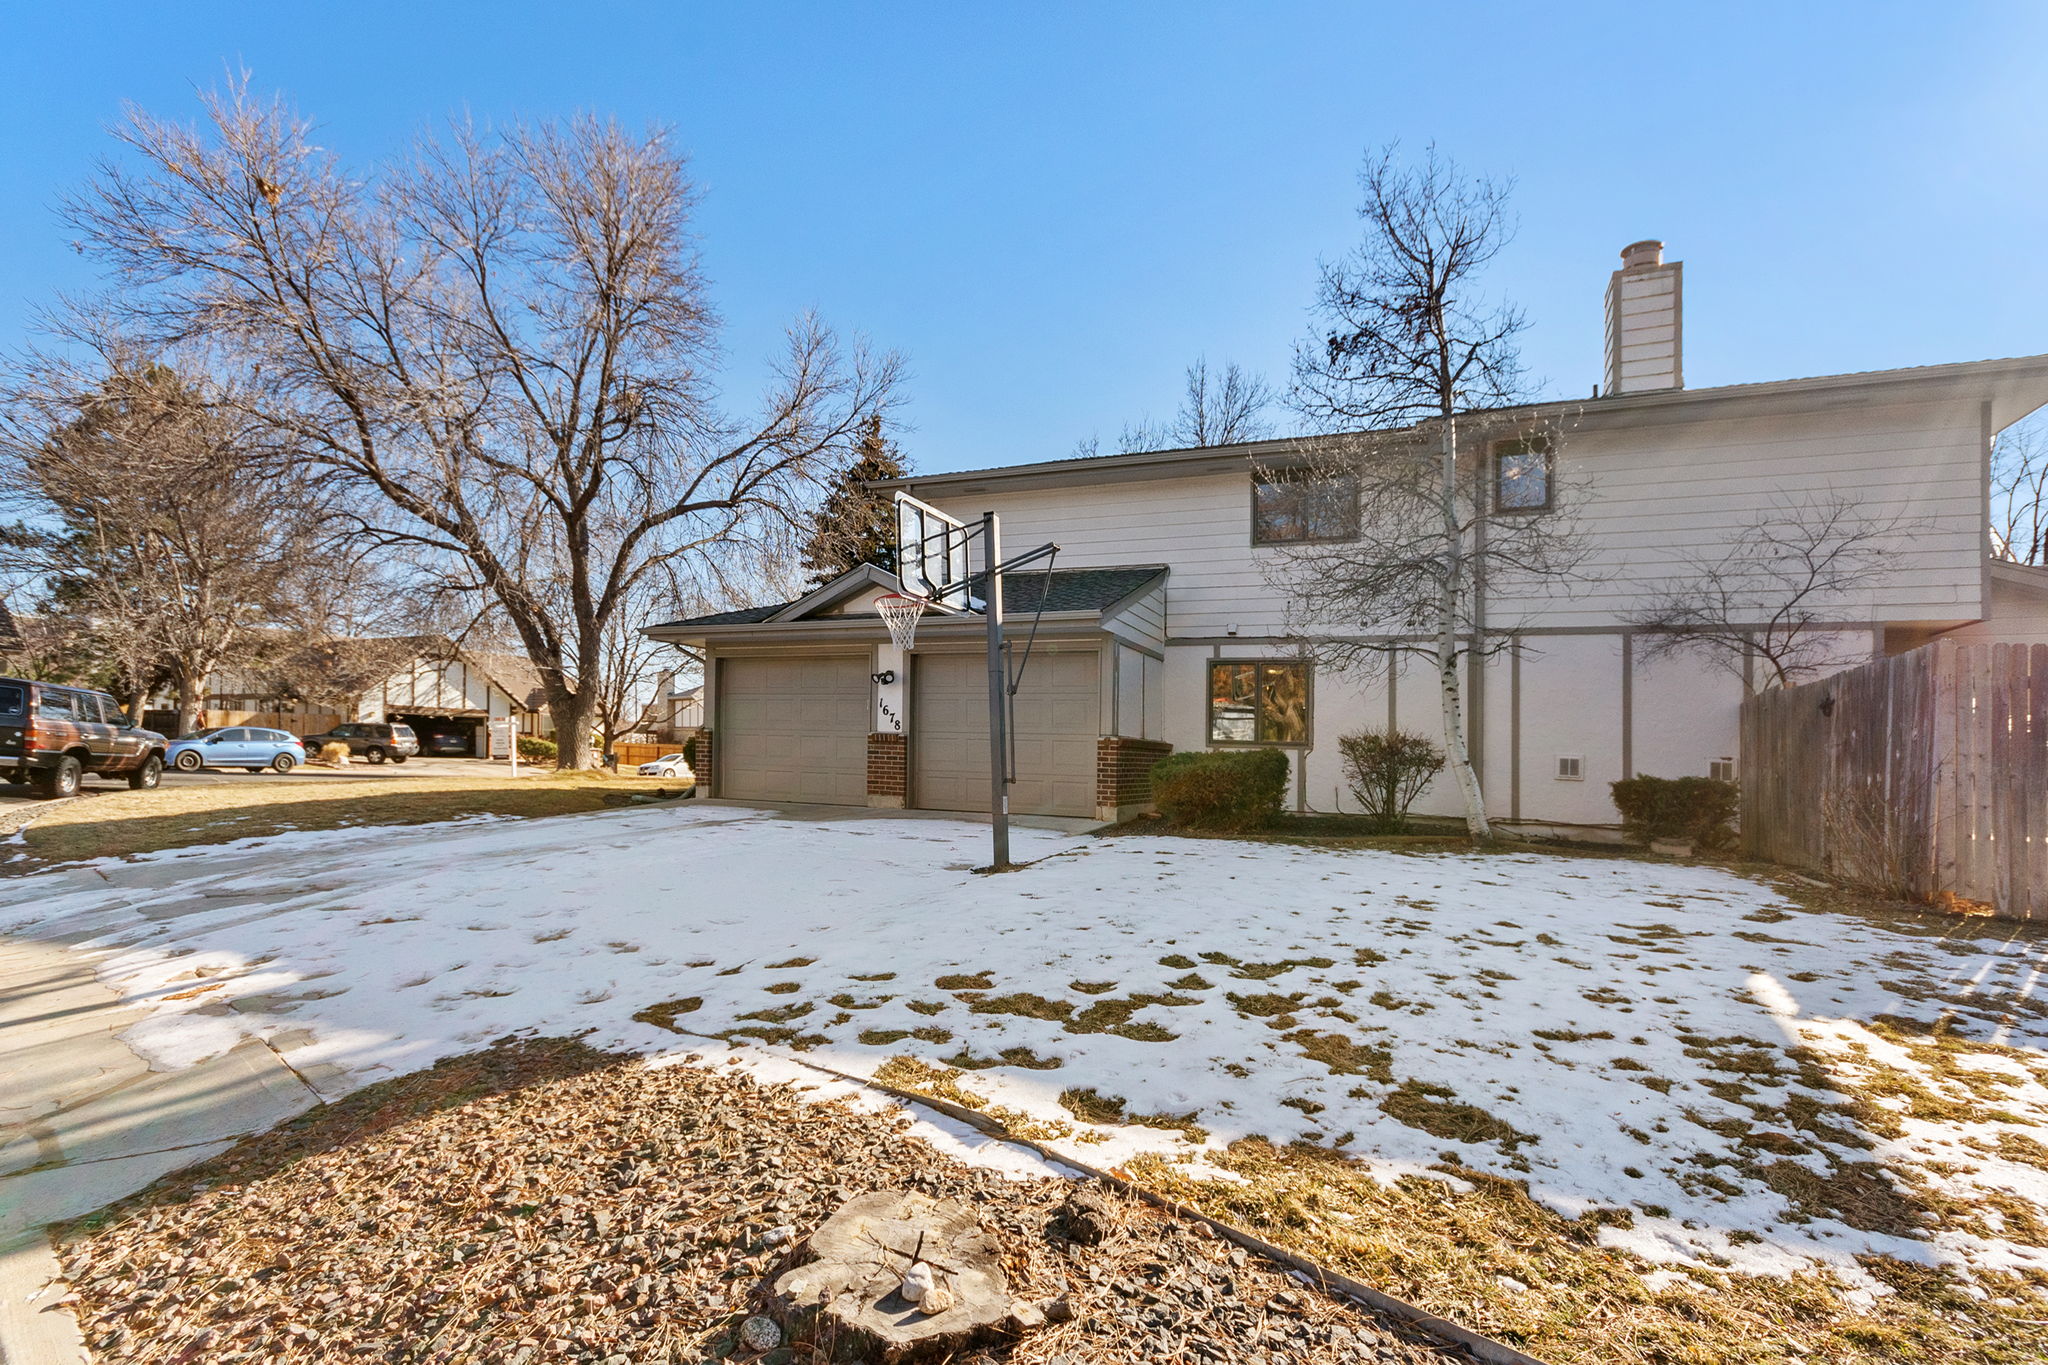  1678 W 115th Cir, Westminster, CO 80234, US Photo 2